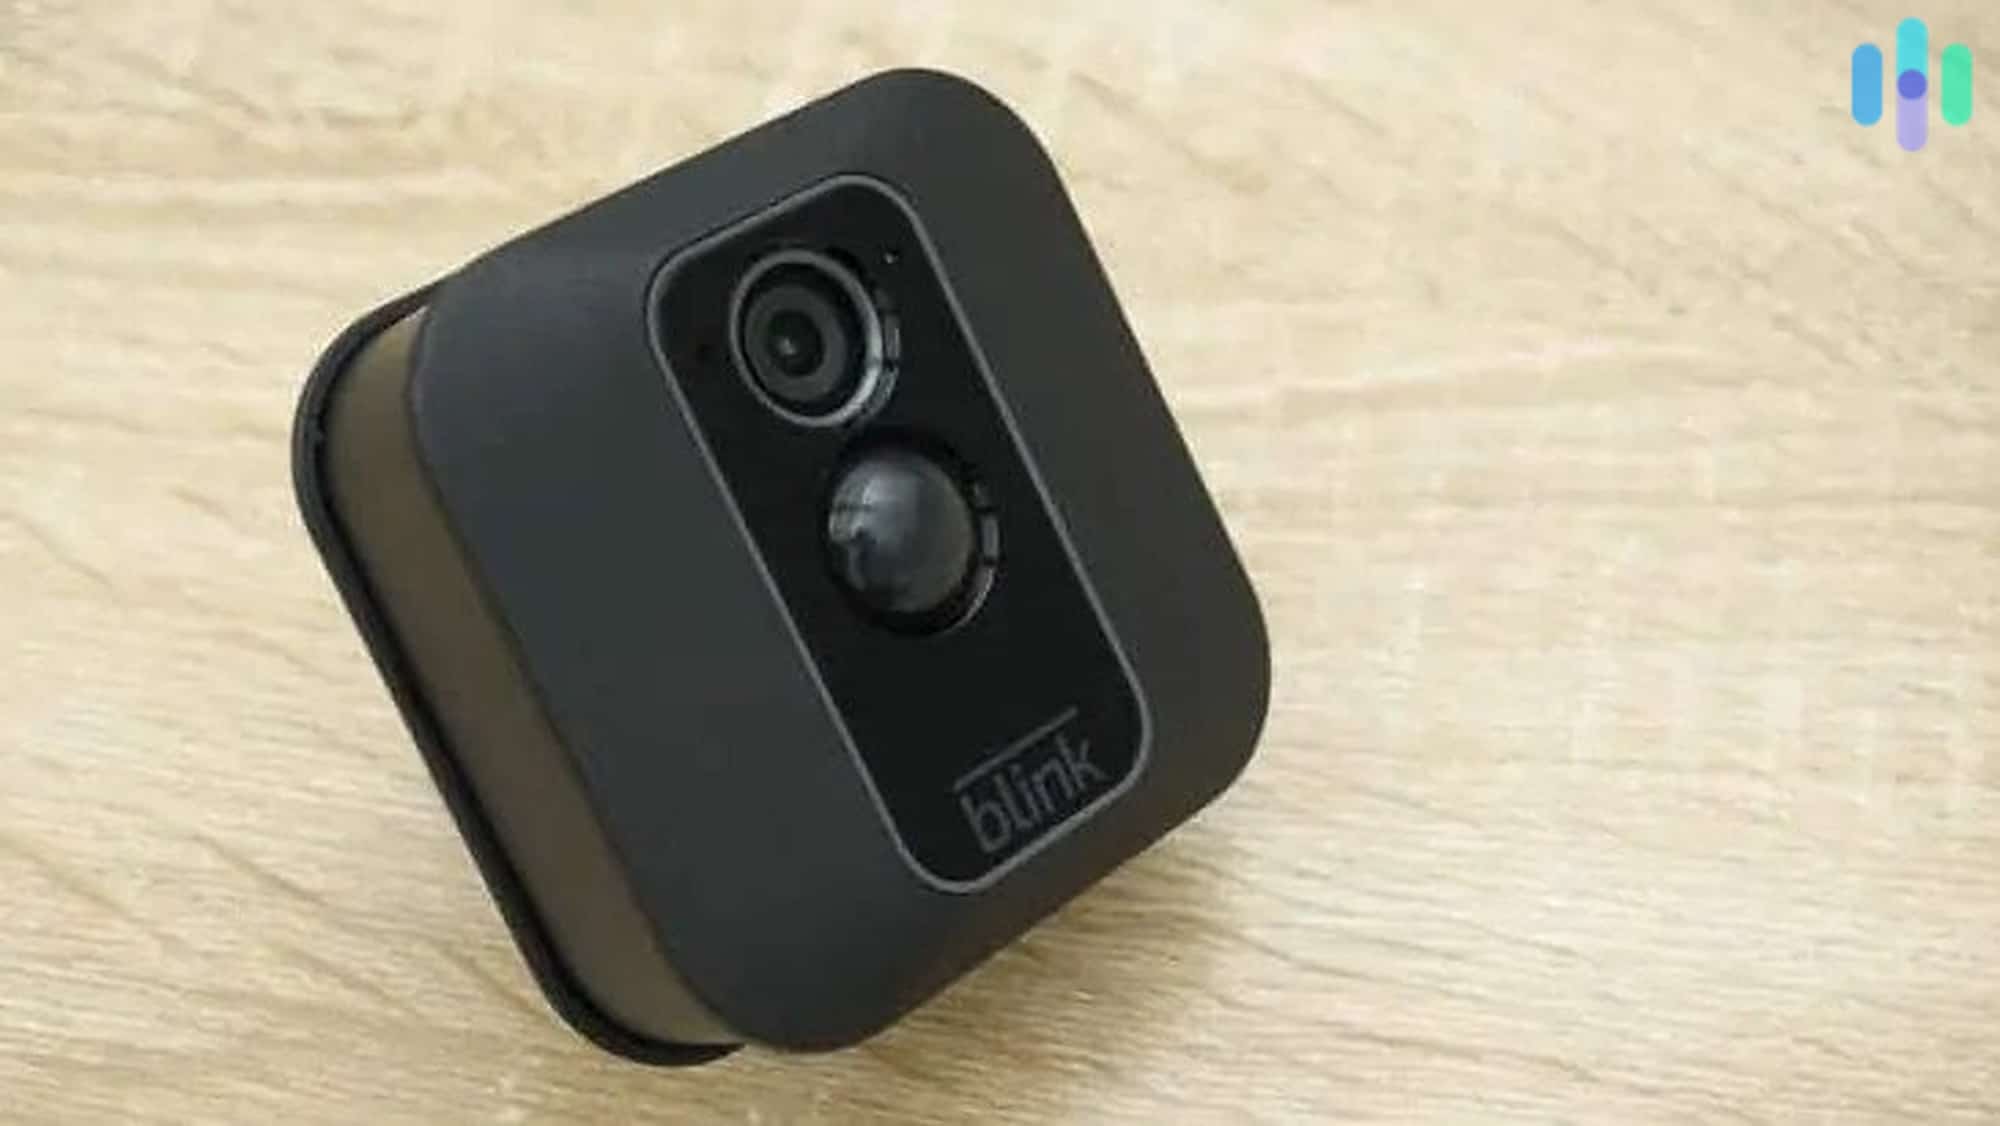 Blink cameras are up to $190 off with this early Prime Day deal